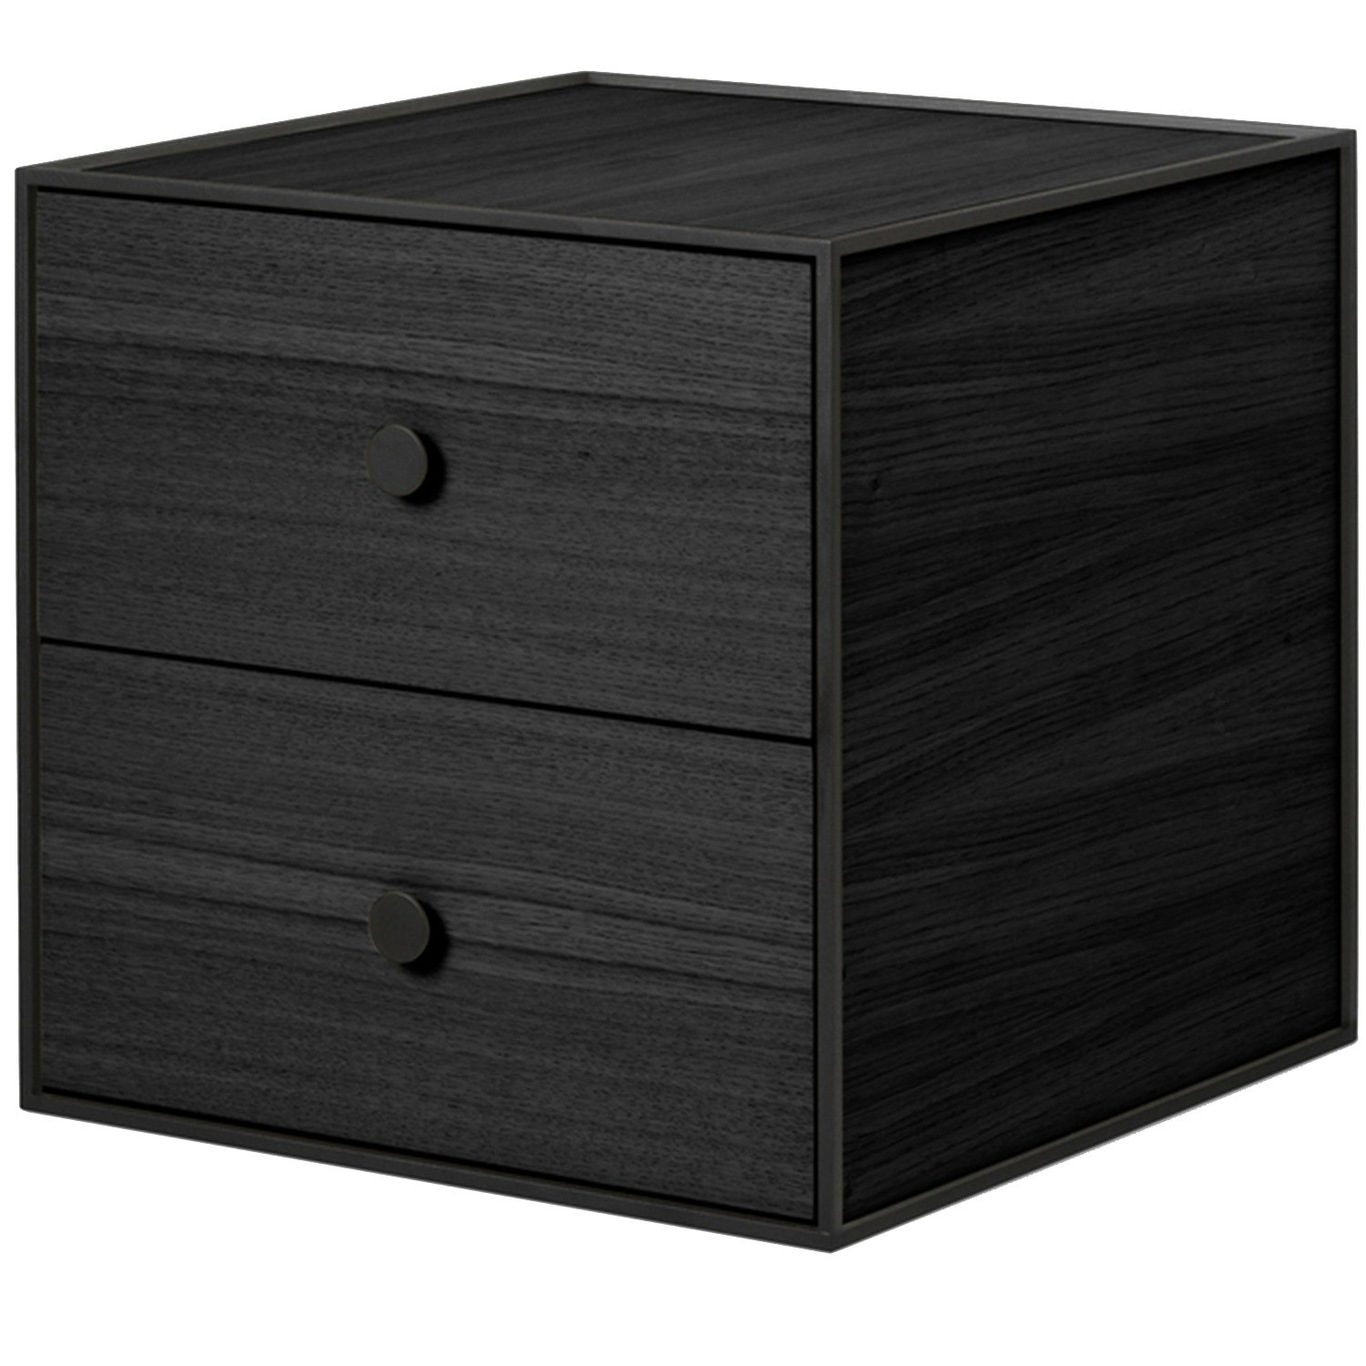 Frame 35 Bedside Table With 2 Drawers, Black Stained Ash